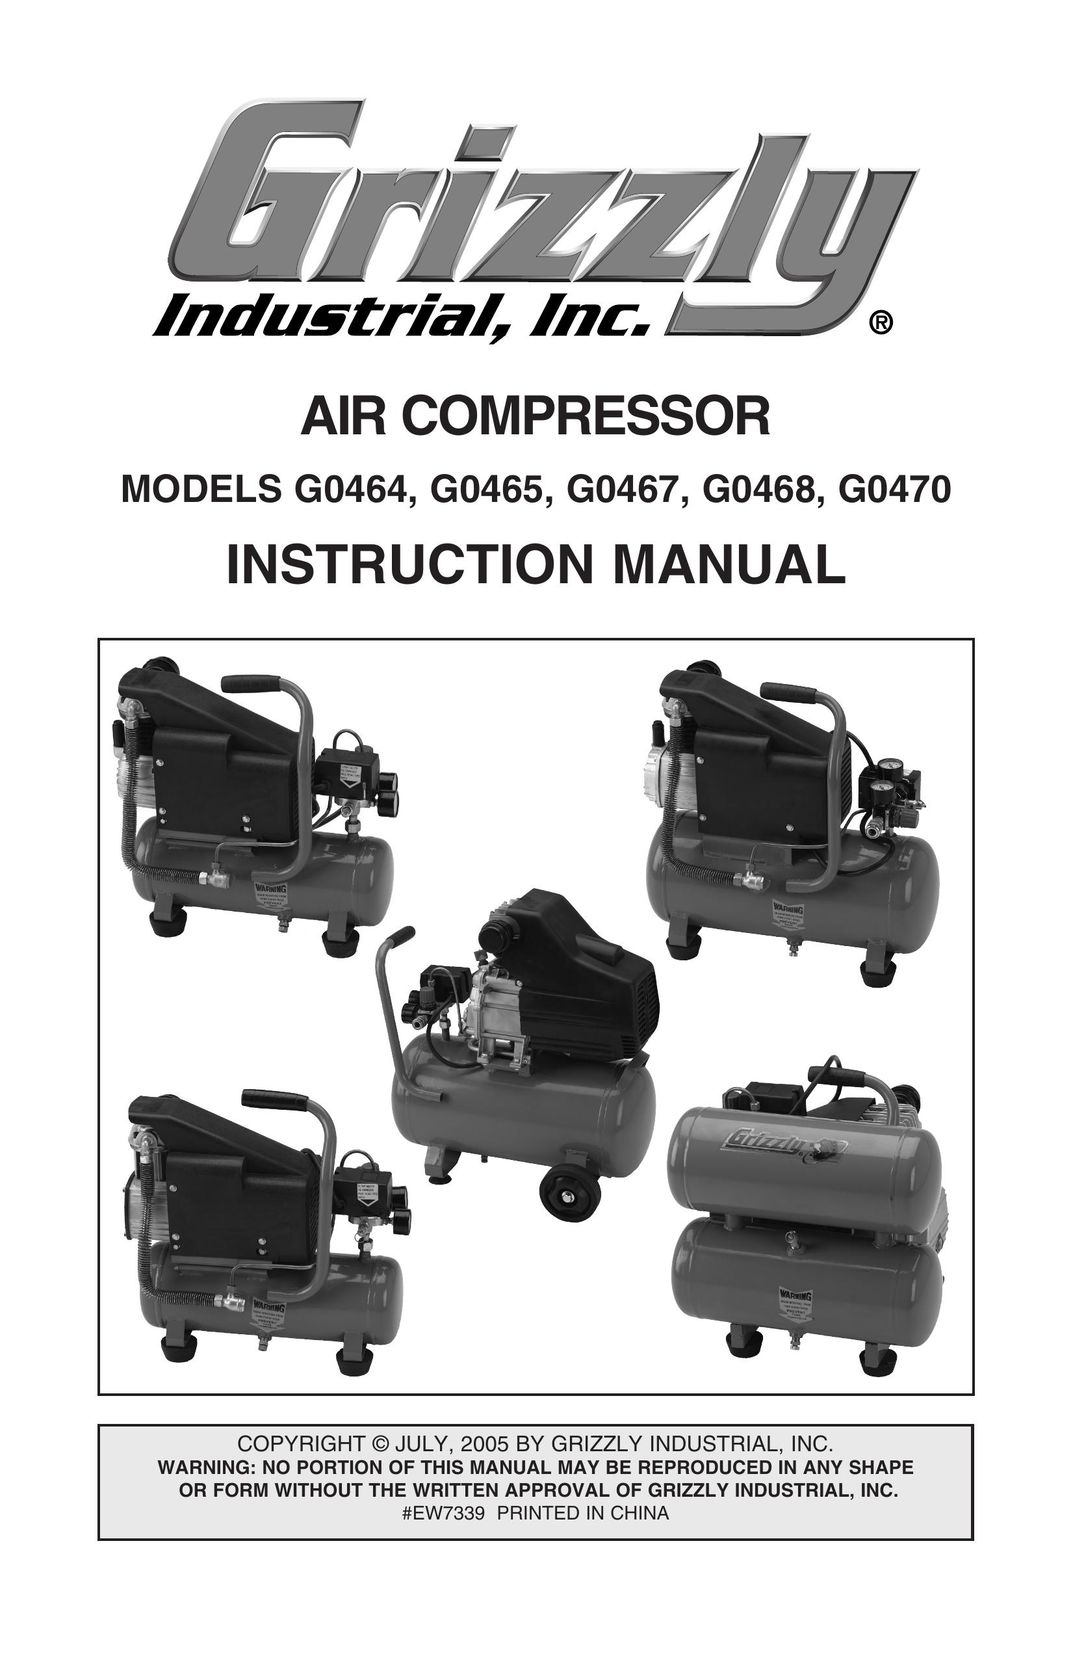 Grizzly G470 Air Compressor User Manual